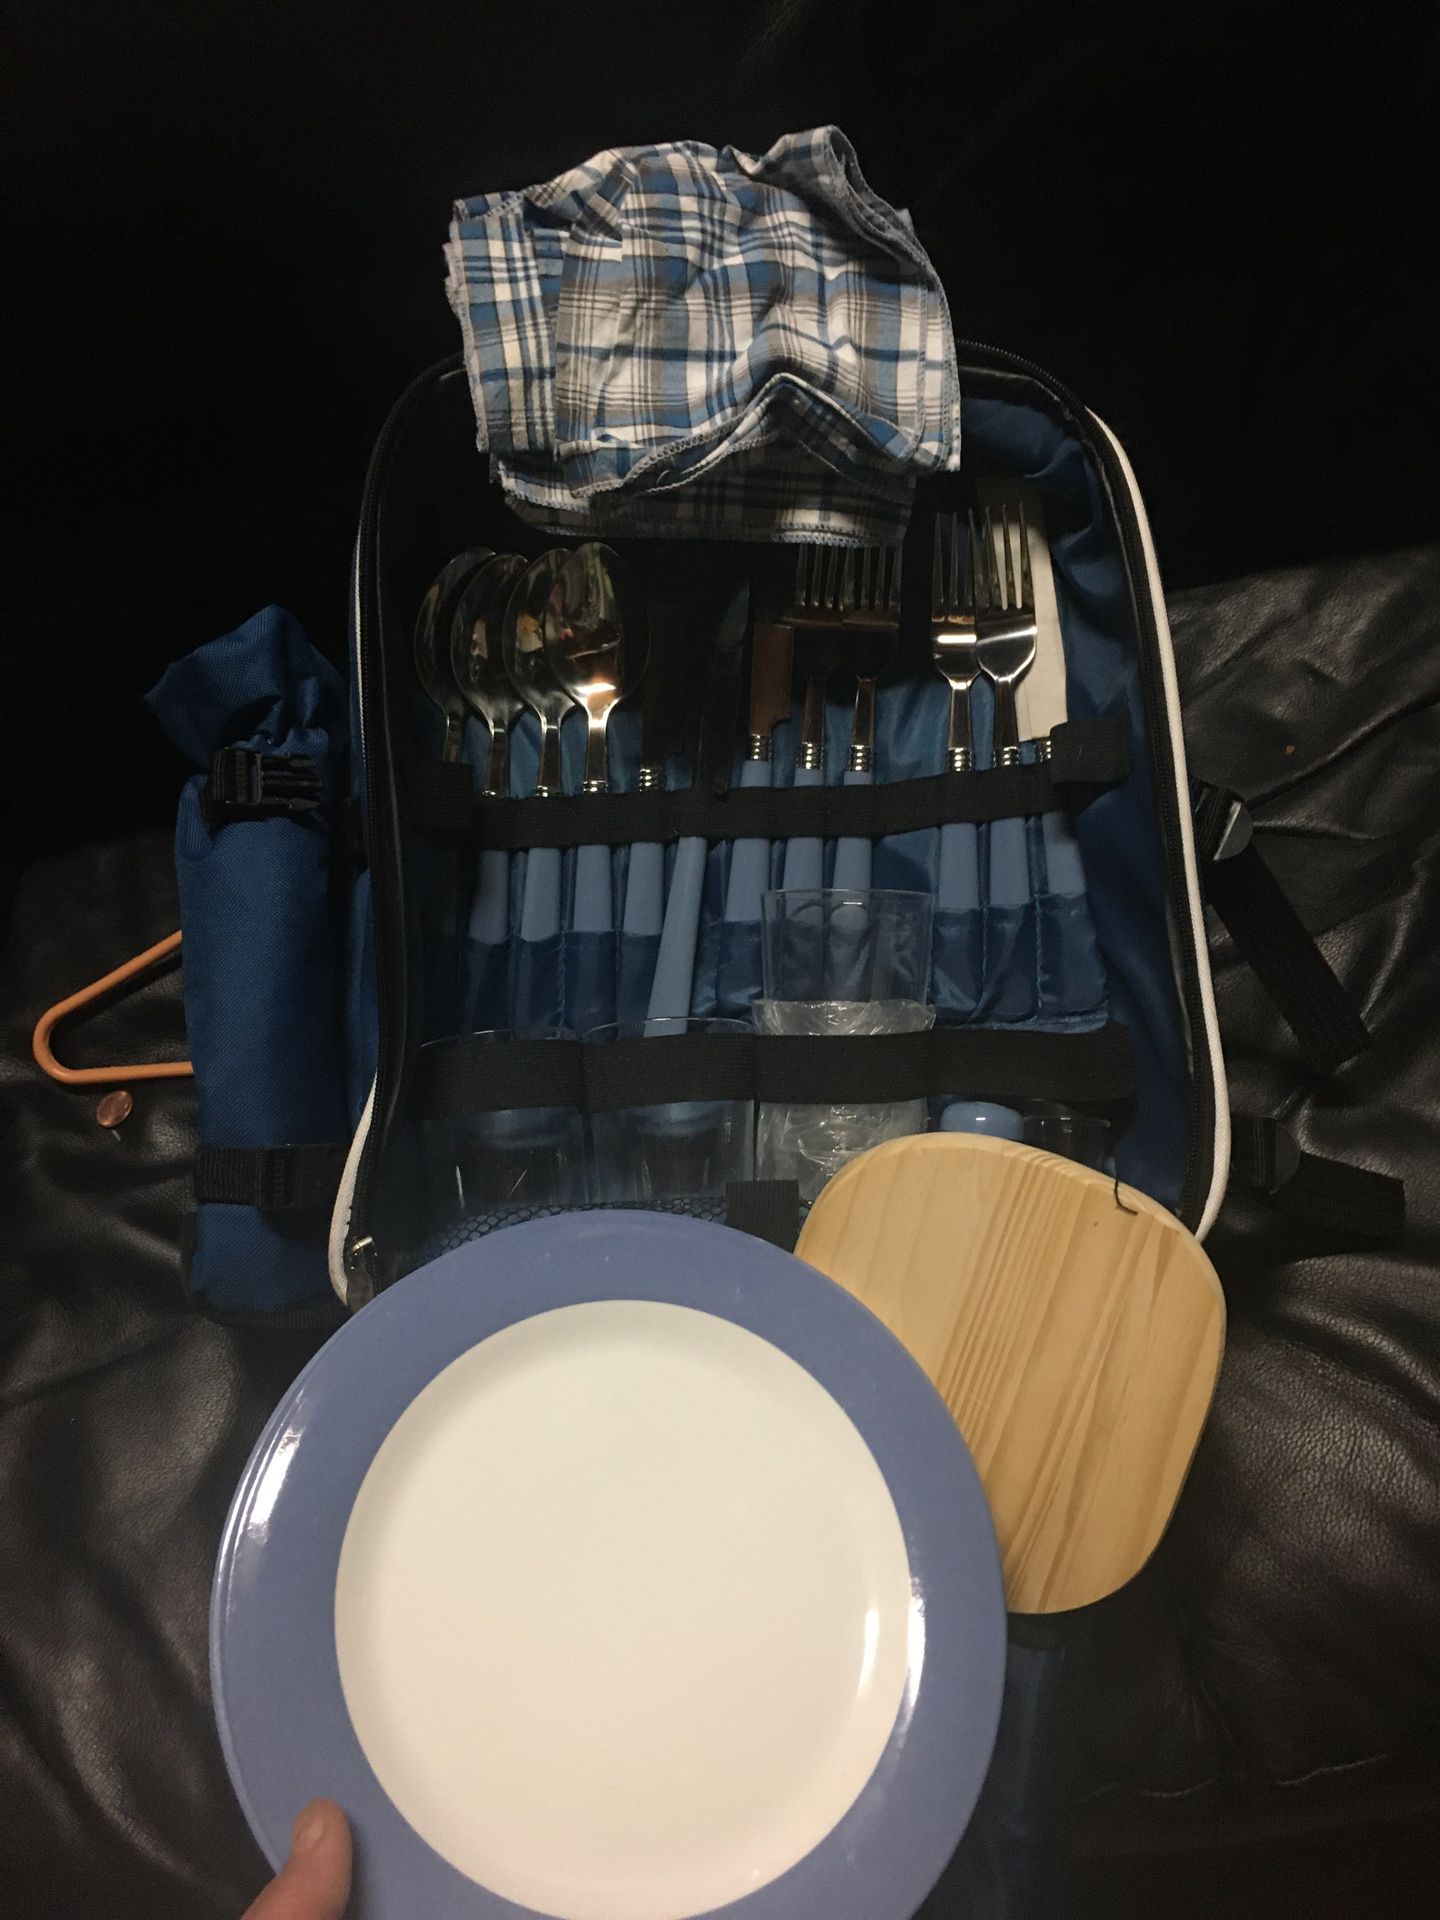 Coolest picnic backpack with everything including blanket needed